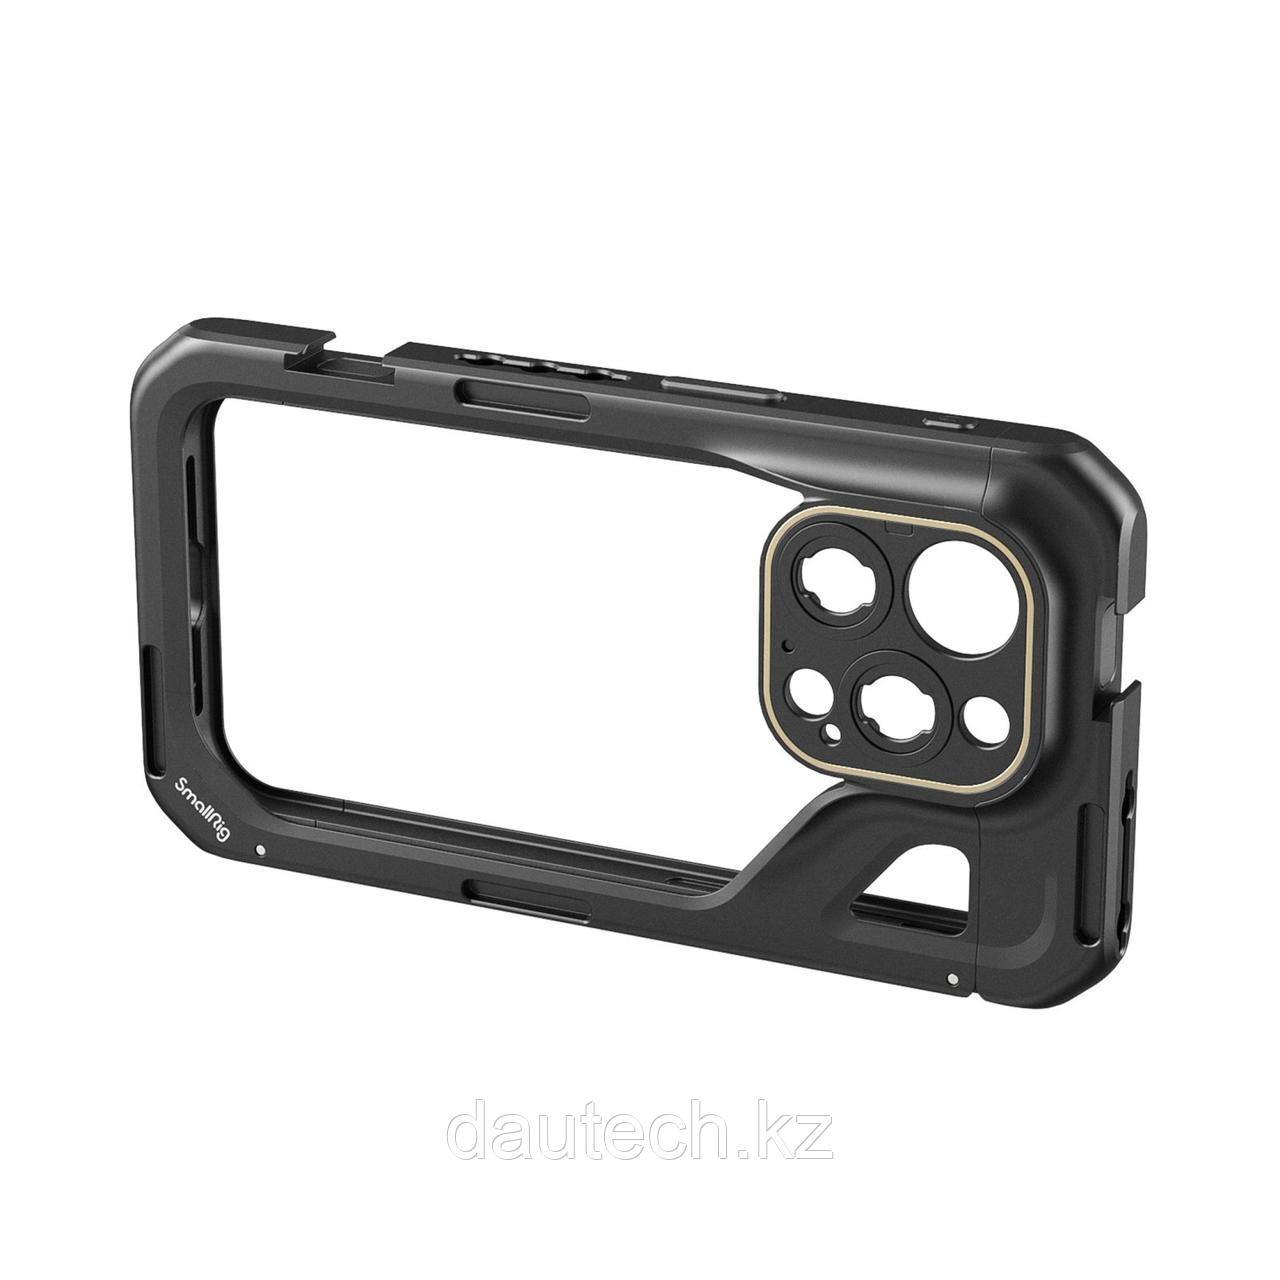 Клетка-кейс Smallrig mobile video cage for iphone 15 pro 4396 - фото 1 - id-p115503084